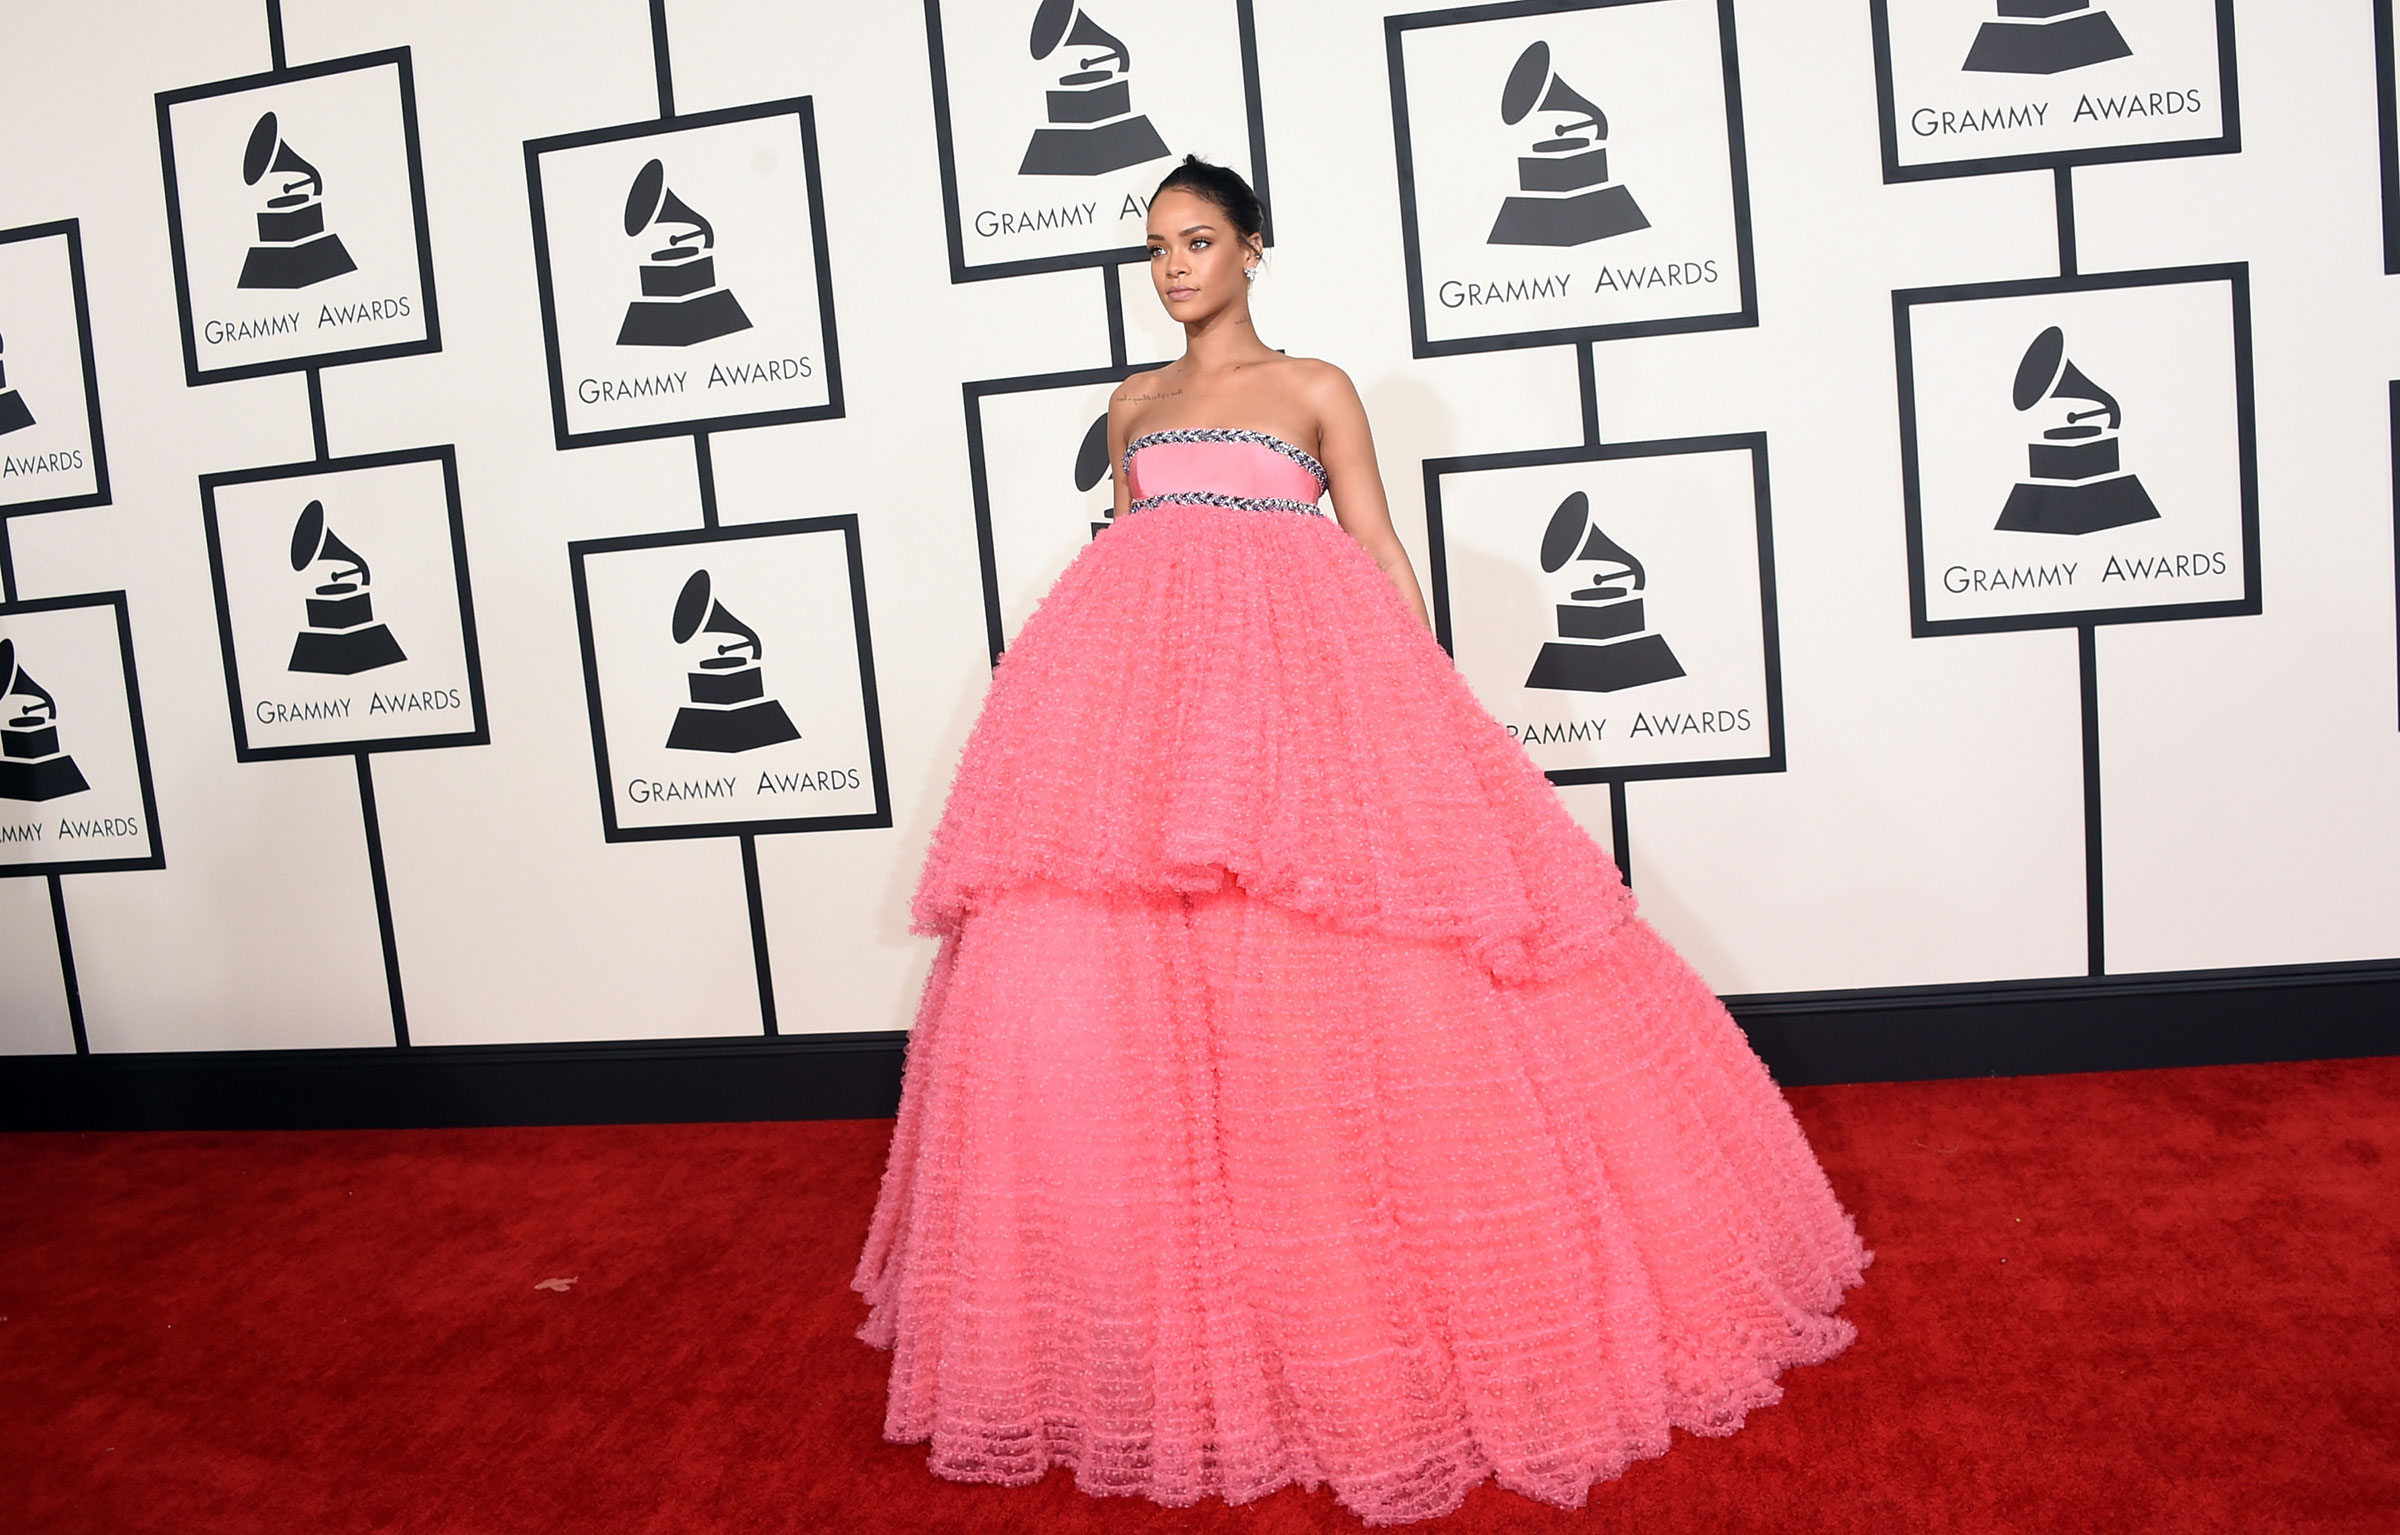 Rihanna attends The 57th Annual Grammy Awards in Los Angeles, on Feb 8, 2015. (Jason Merritt—Getty Images)